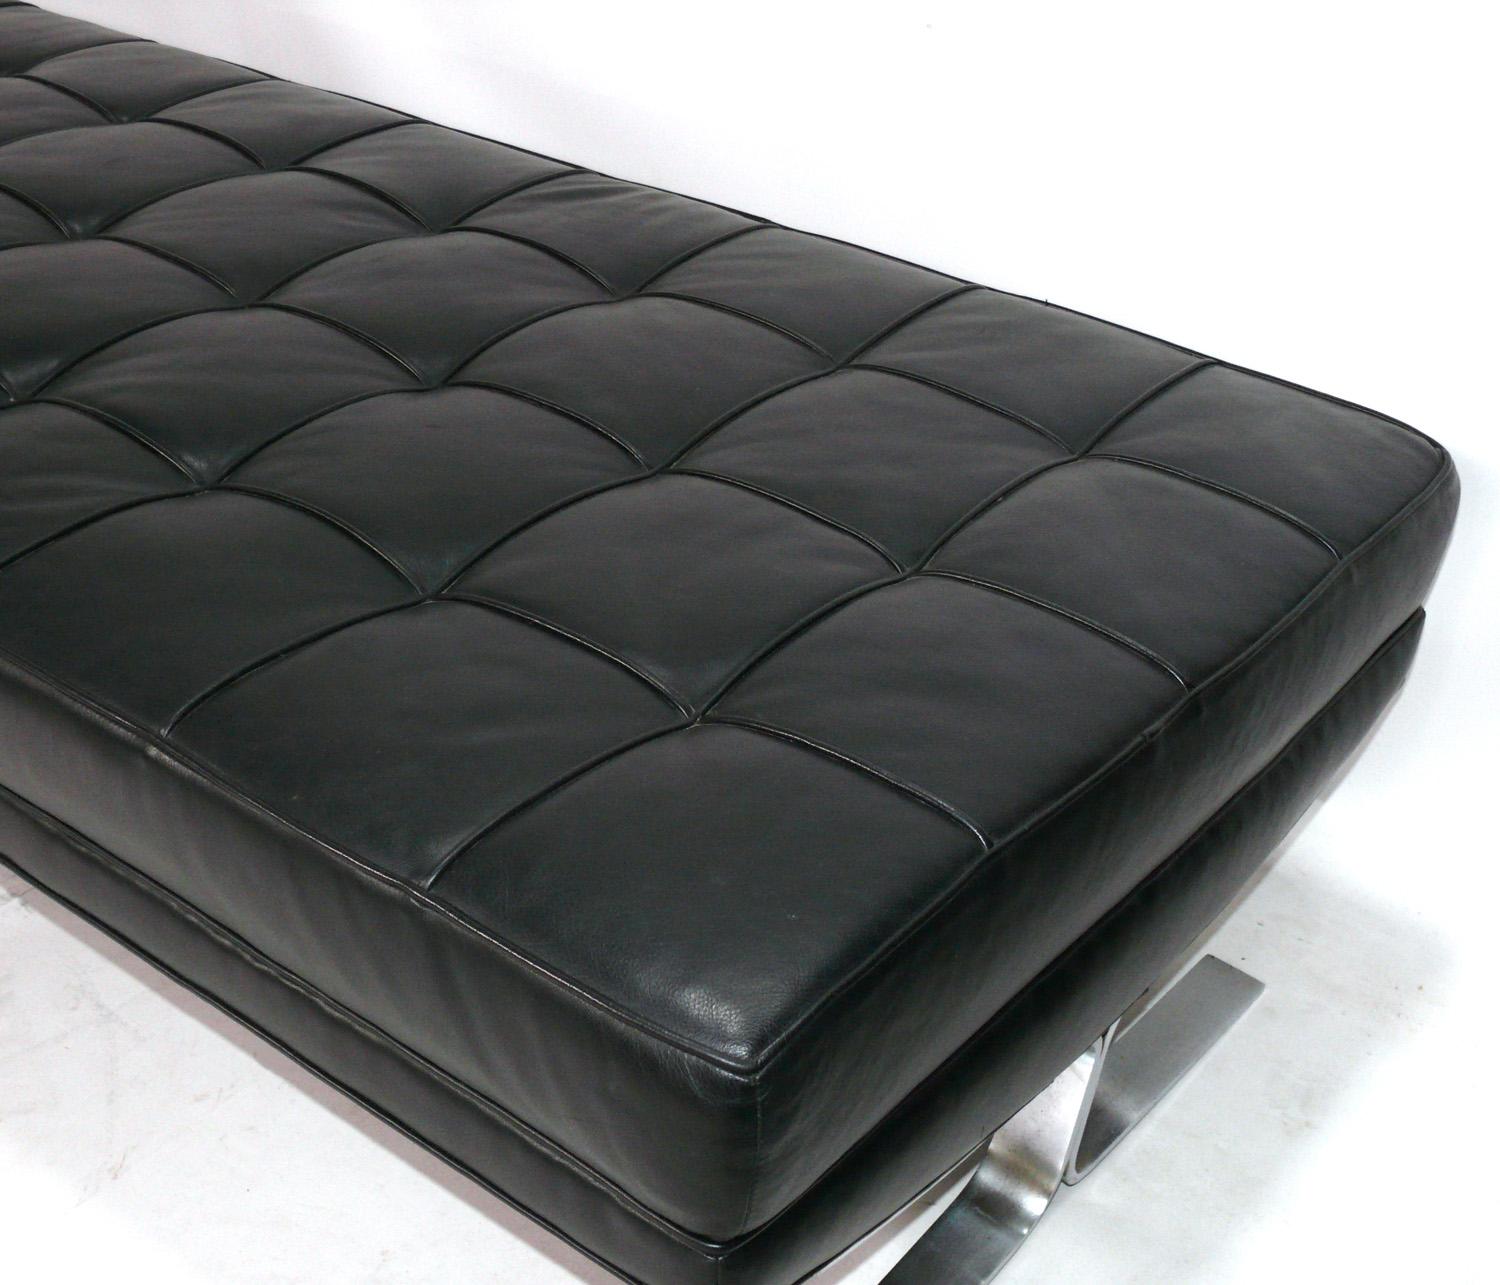 Tufted Black Leather and Satin Chrome Leg Bench attributed to Nicos Zographos In Good Condition For Sale In Atlanta, GA